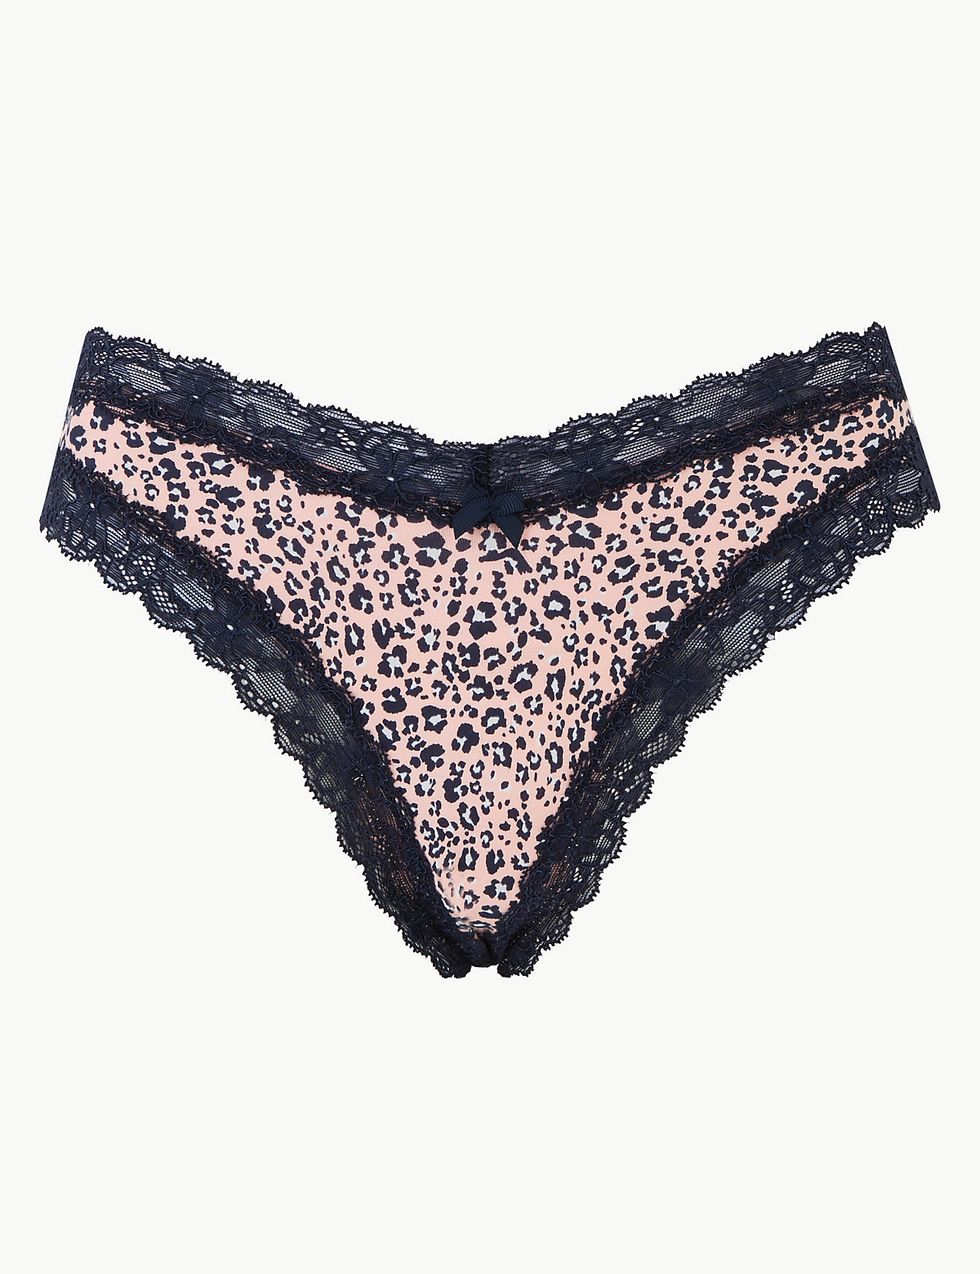 NEW! M&S Marks & Spencer fuchsia lace no VPL thong G-string knickers panties